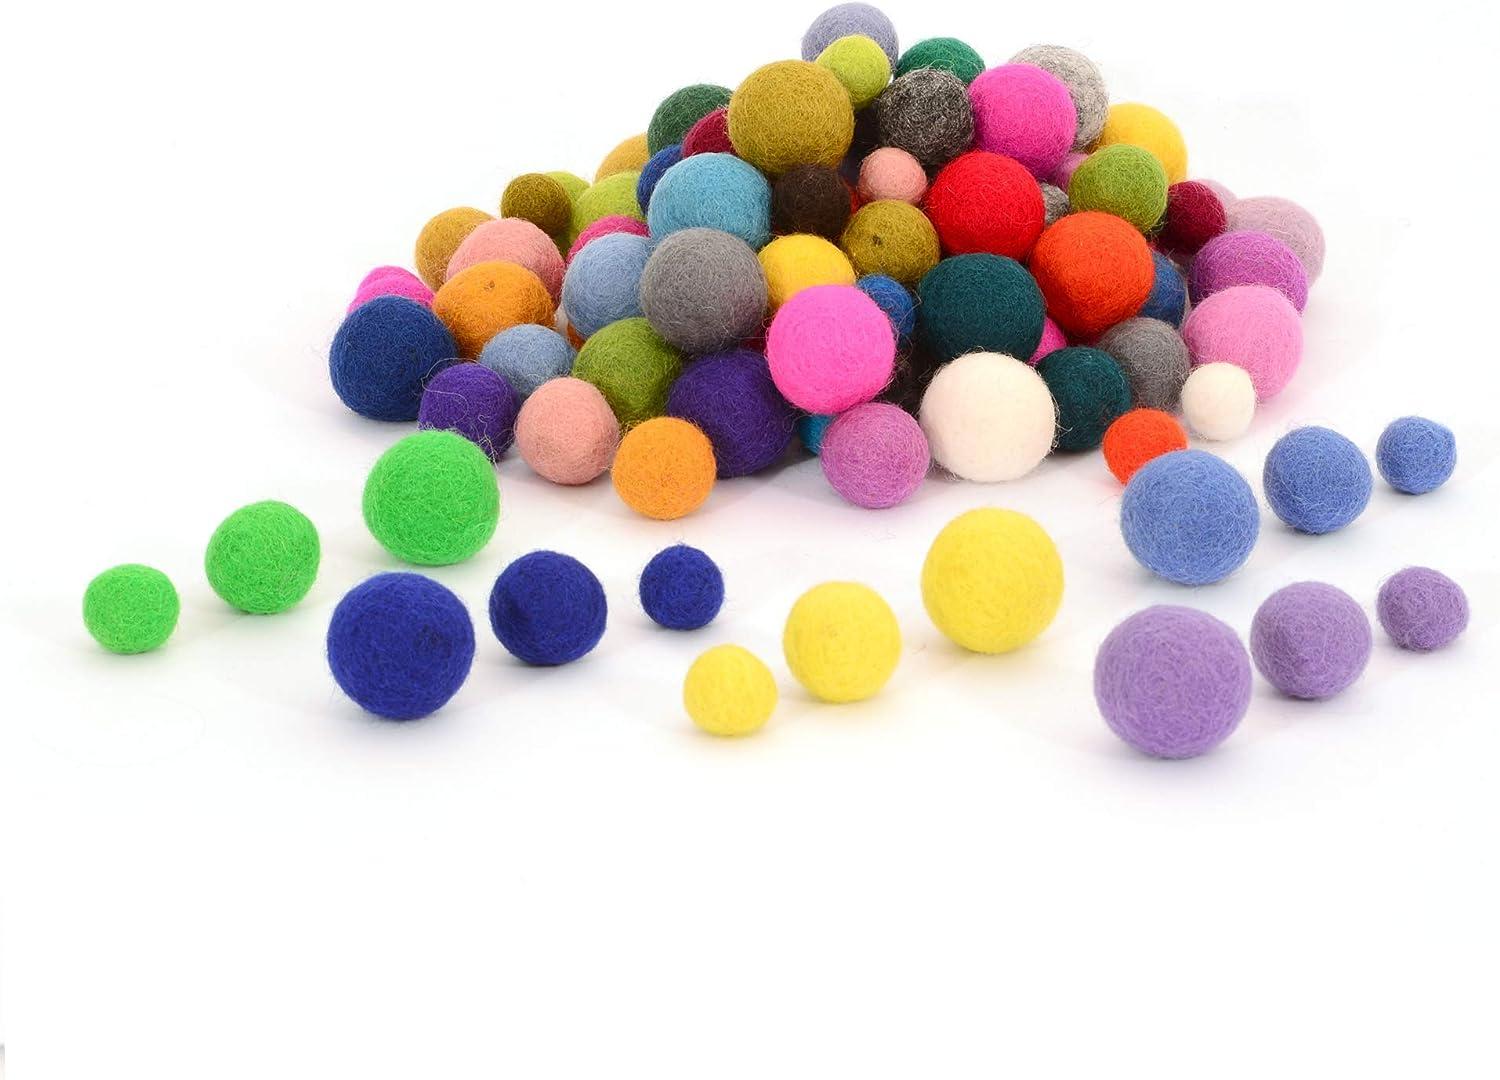 Glaciart One Felt Balls, Felt Pom Poms, (240 Pieces) 2 Centimeters - 0.8  Inch Handmade Felted 40 Color (Red, Pink, Blue, Orange, Yellow, Gray,  Pastel